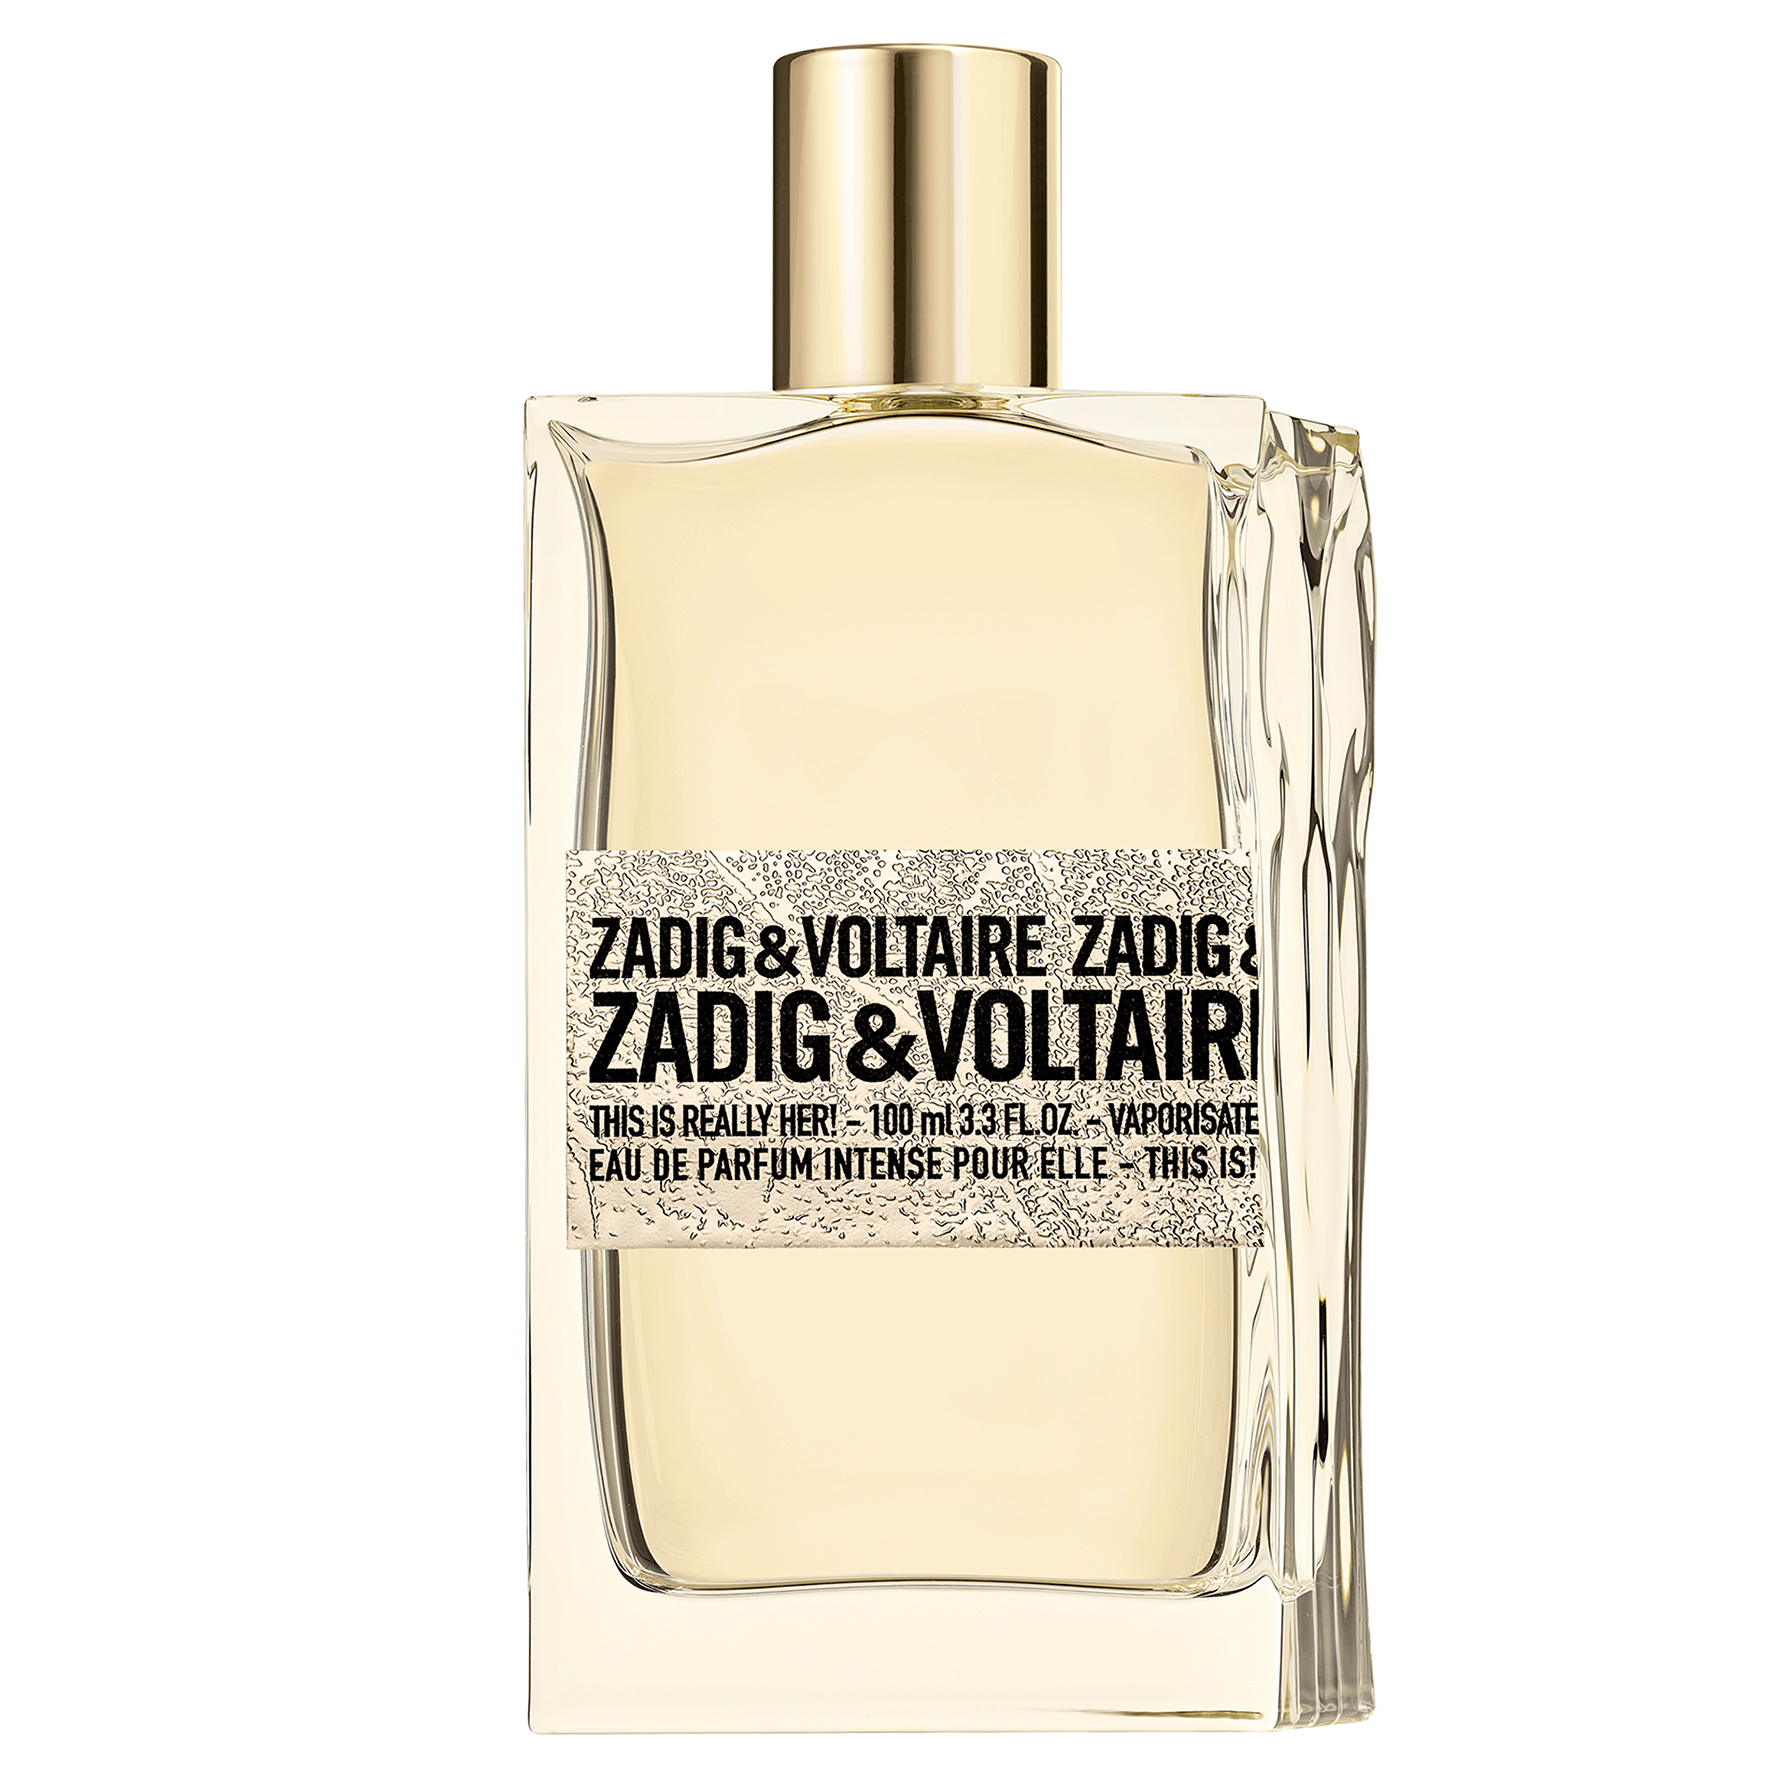 © Zadig&Voltaire THIS IS REALLY HER!